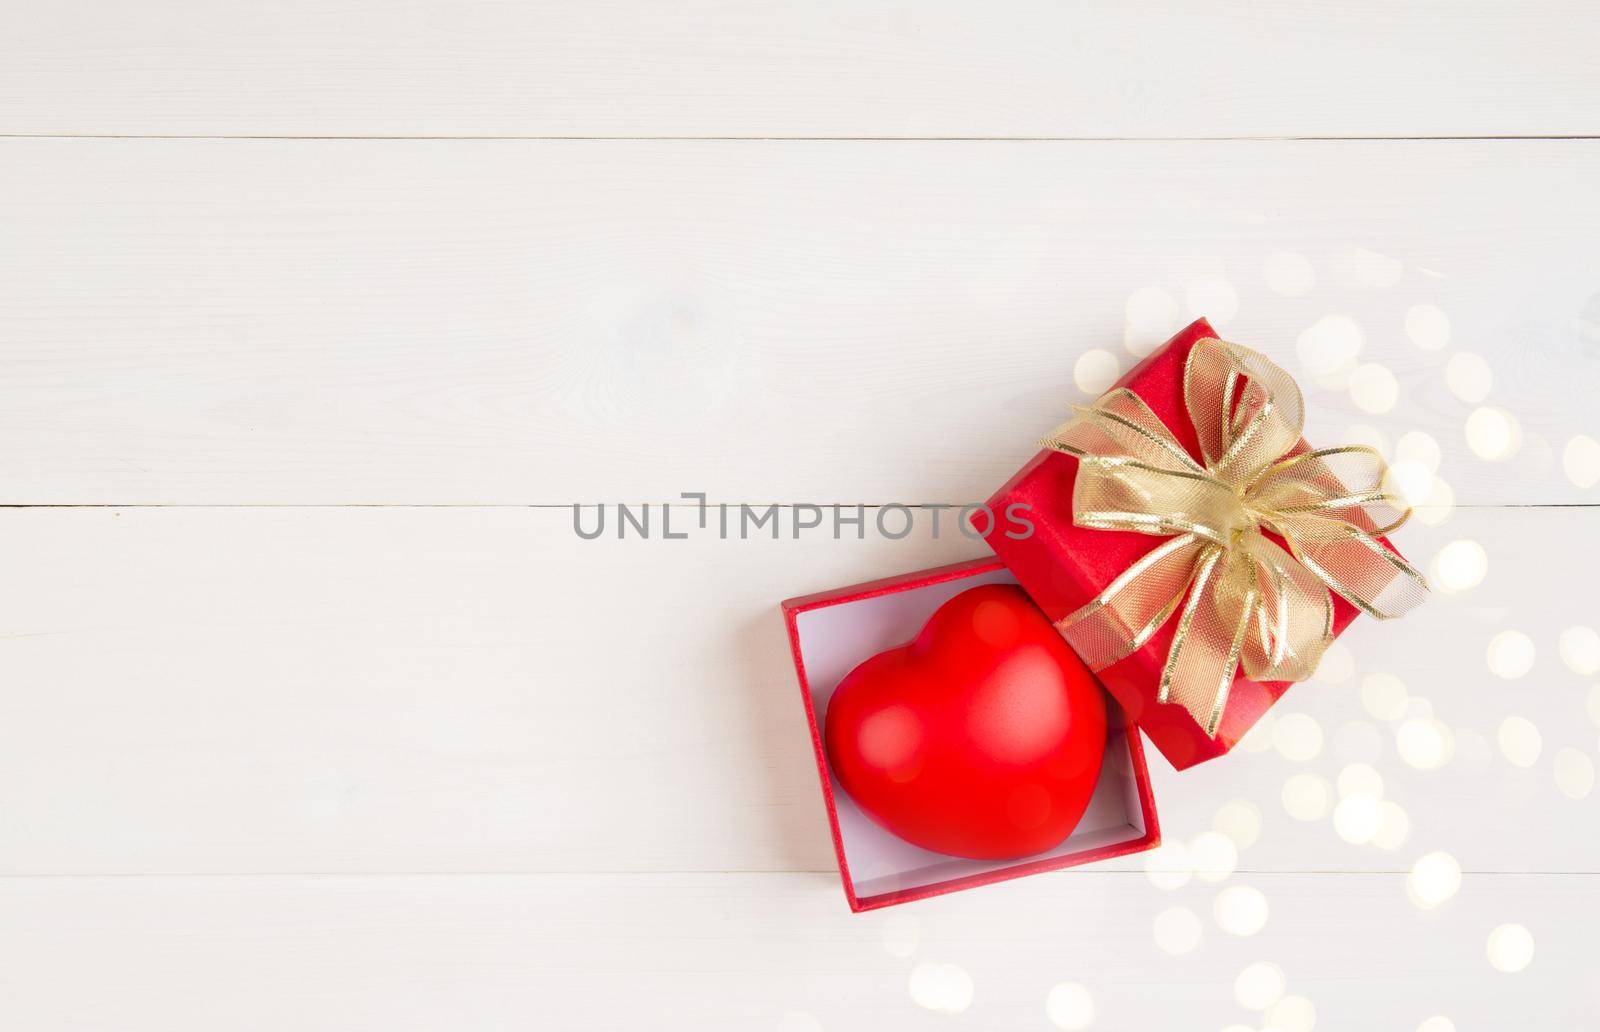 Valentine day, red gift box open put in heart with bokeh background, celebration and anniversary with giving love, donate and aid with heart shape symbol, charity and health, holiday concept.